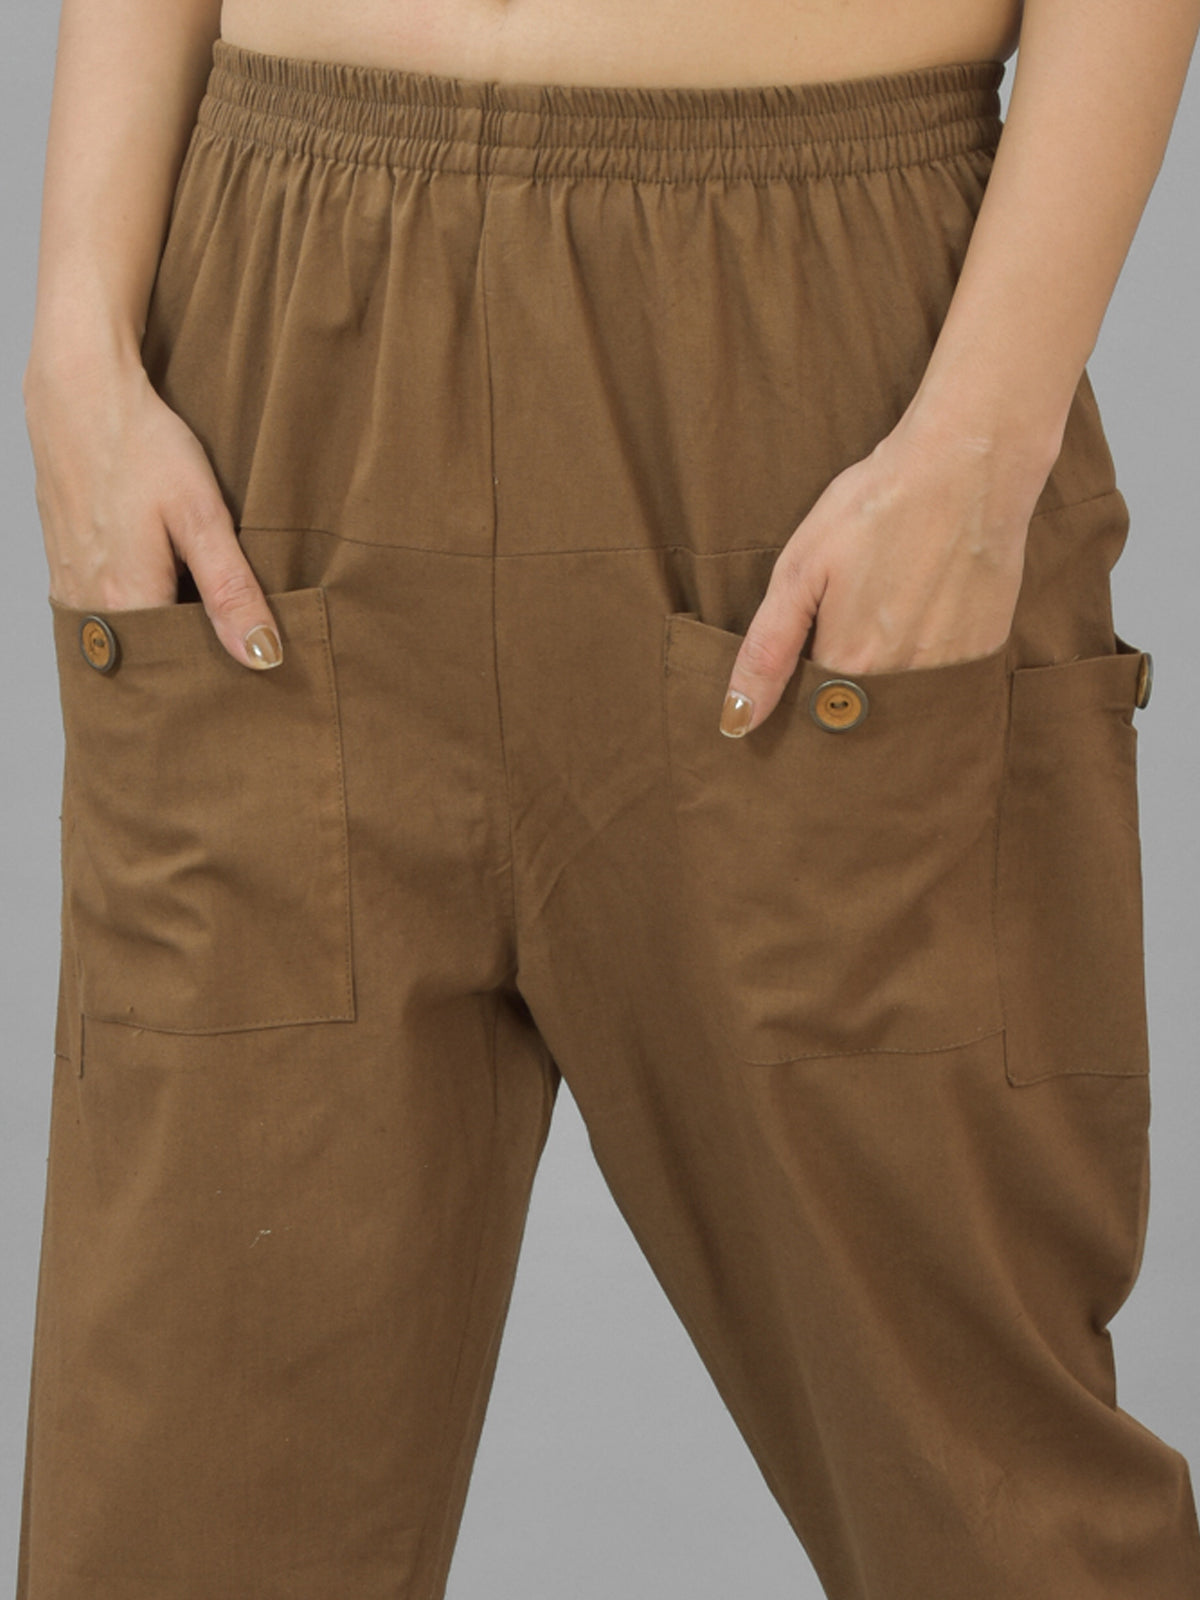 Combo Pack Of Womens Brown And Dark Blue Four Pocket Cotton Cargo Pants